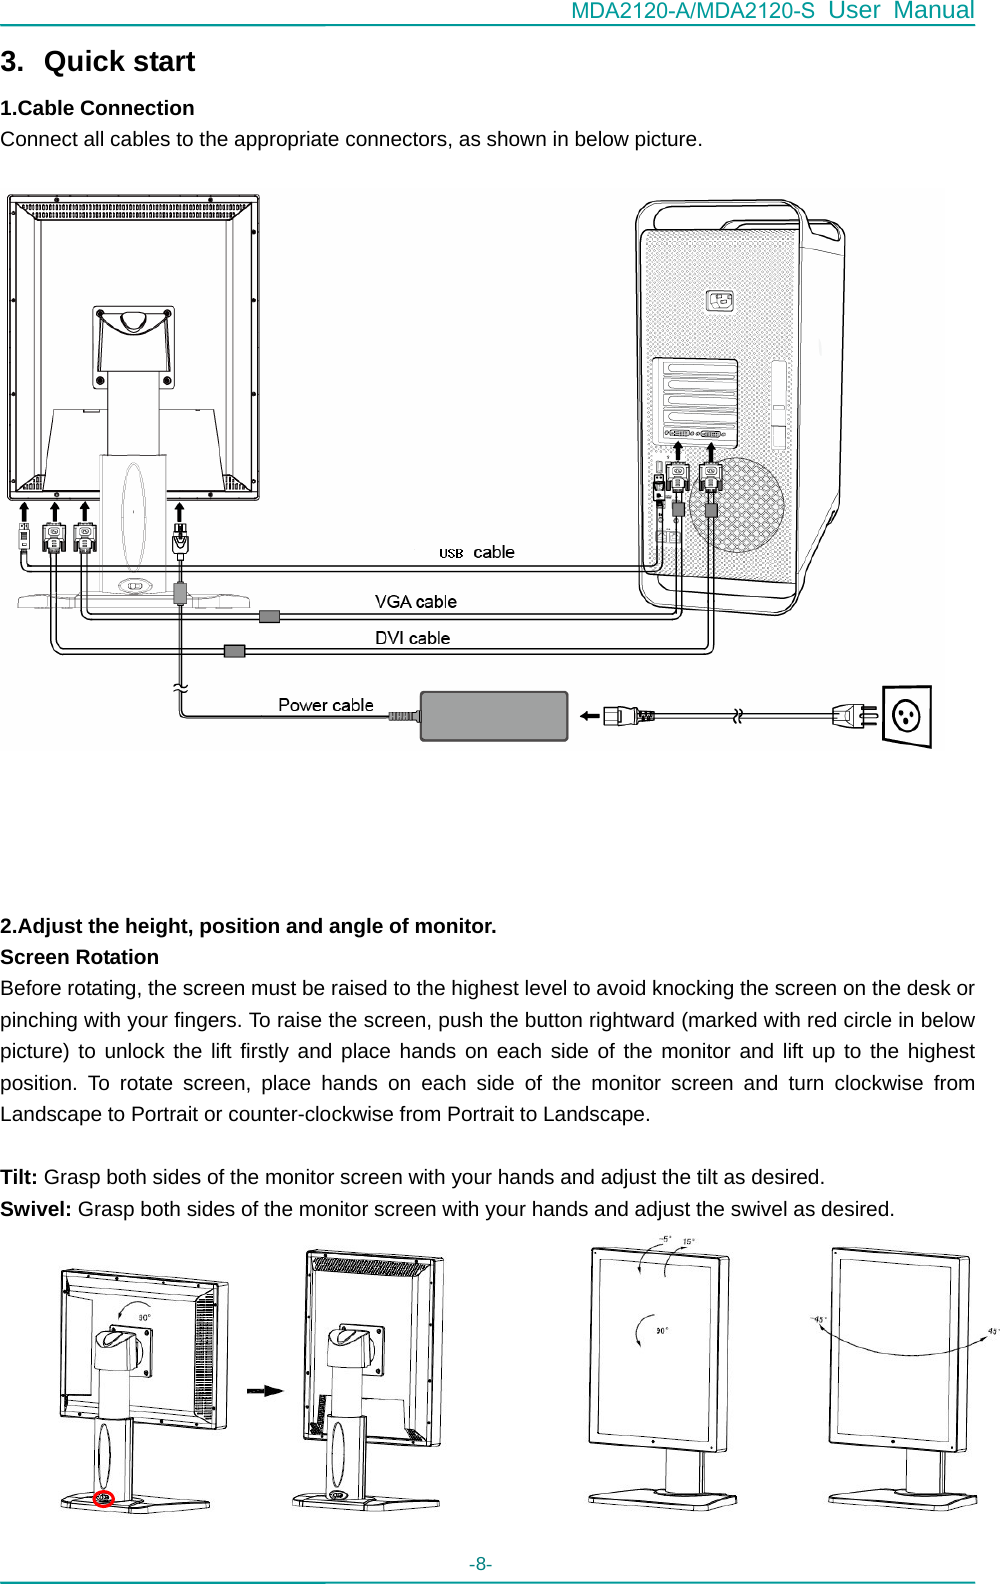 MDA2120-A/MDA2120-S User Manual - 8-   3. Quick start 1.Cable Connection Connect all cables to the appropriate connectors, as shown in below picture.        2.Adjust the height, position and angle of monitor. Screen Rotation   Before rotating, the screen must be raised to the highest level to avoid knocking the screen on the desk or pinching with your fingers. To raise the screen, push the button rightward (marked with red circle in below picture) to unlock the lift firstly and place hands on each side of the monitor and lift up to the highest position. To rotate screen, place hands on each side of the monitor screen and turn clockwise from Landscape to Portrait or counter-clockwise from Portrait to Landscape.  Tilt: Grasp both sides of the monitor screen with your hands and adjust the tilt as desired. Swivel: Grasp both sides of the monitor screen with your hands and adjust the swivel as desired.           